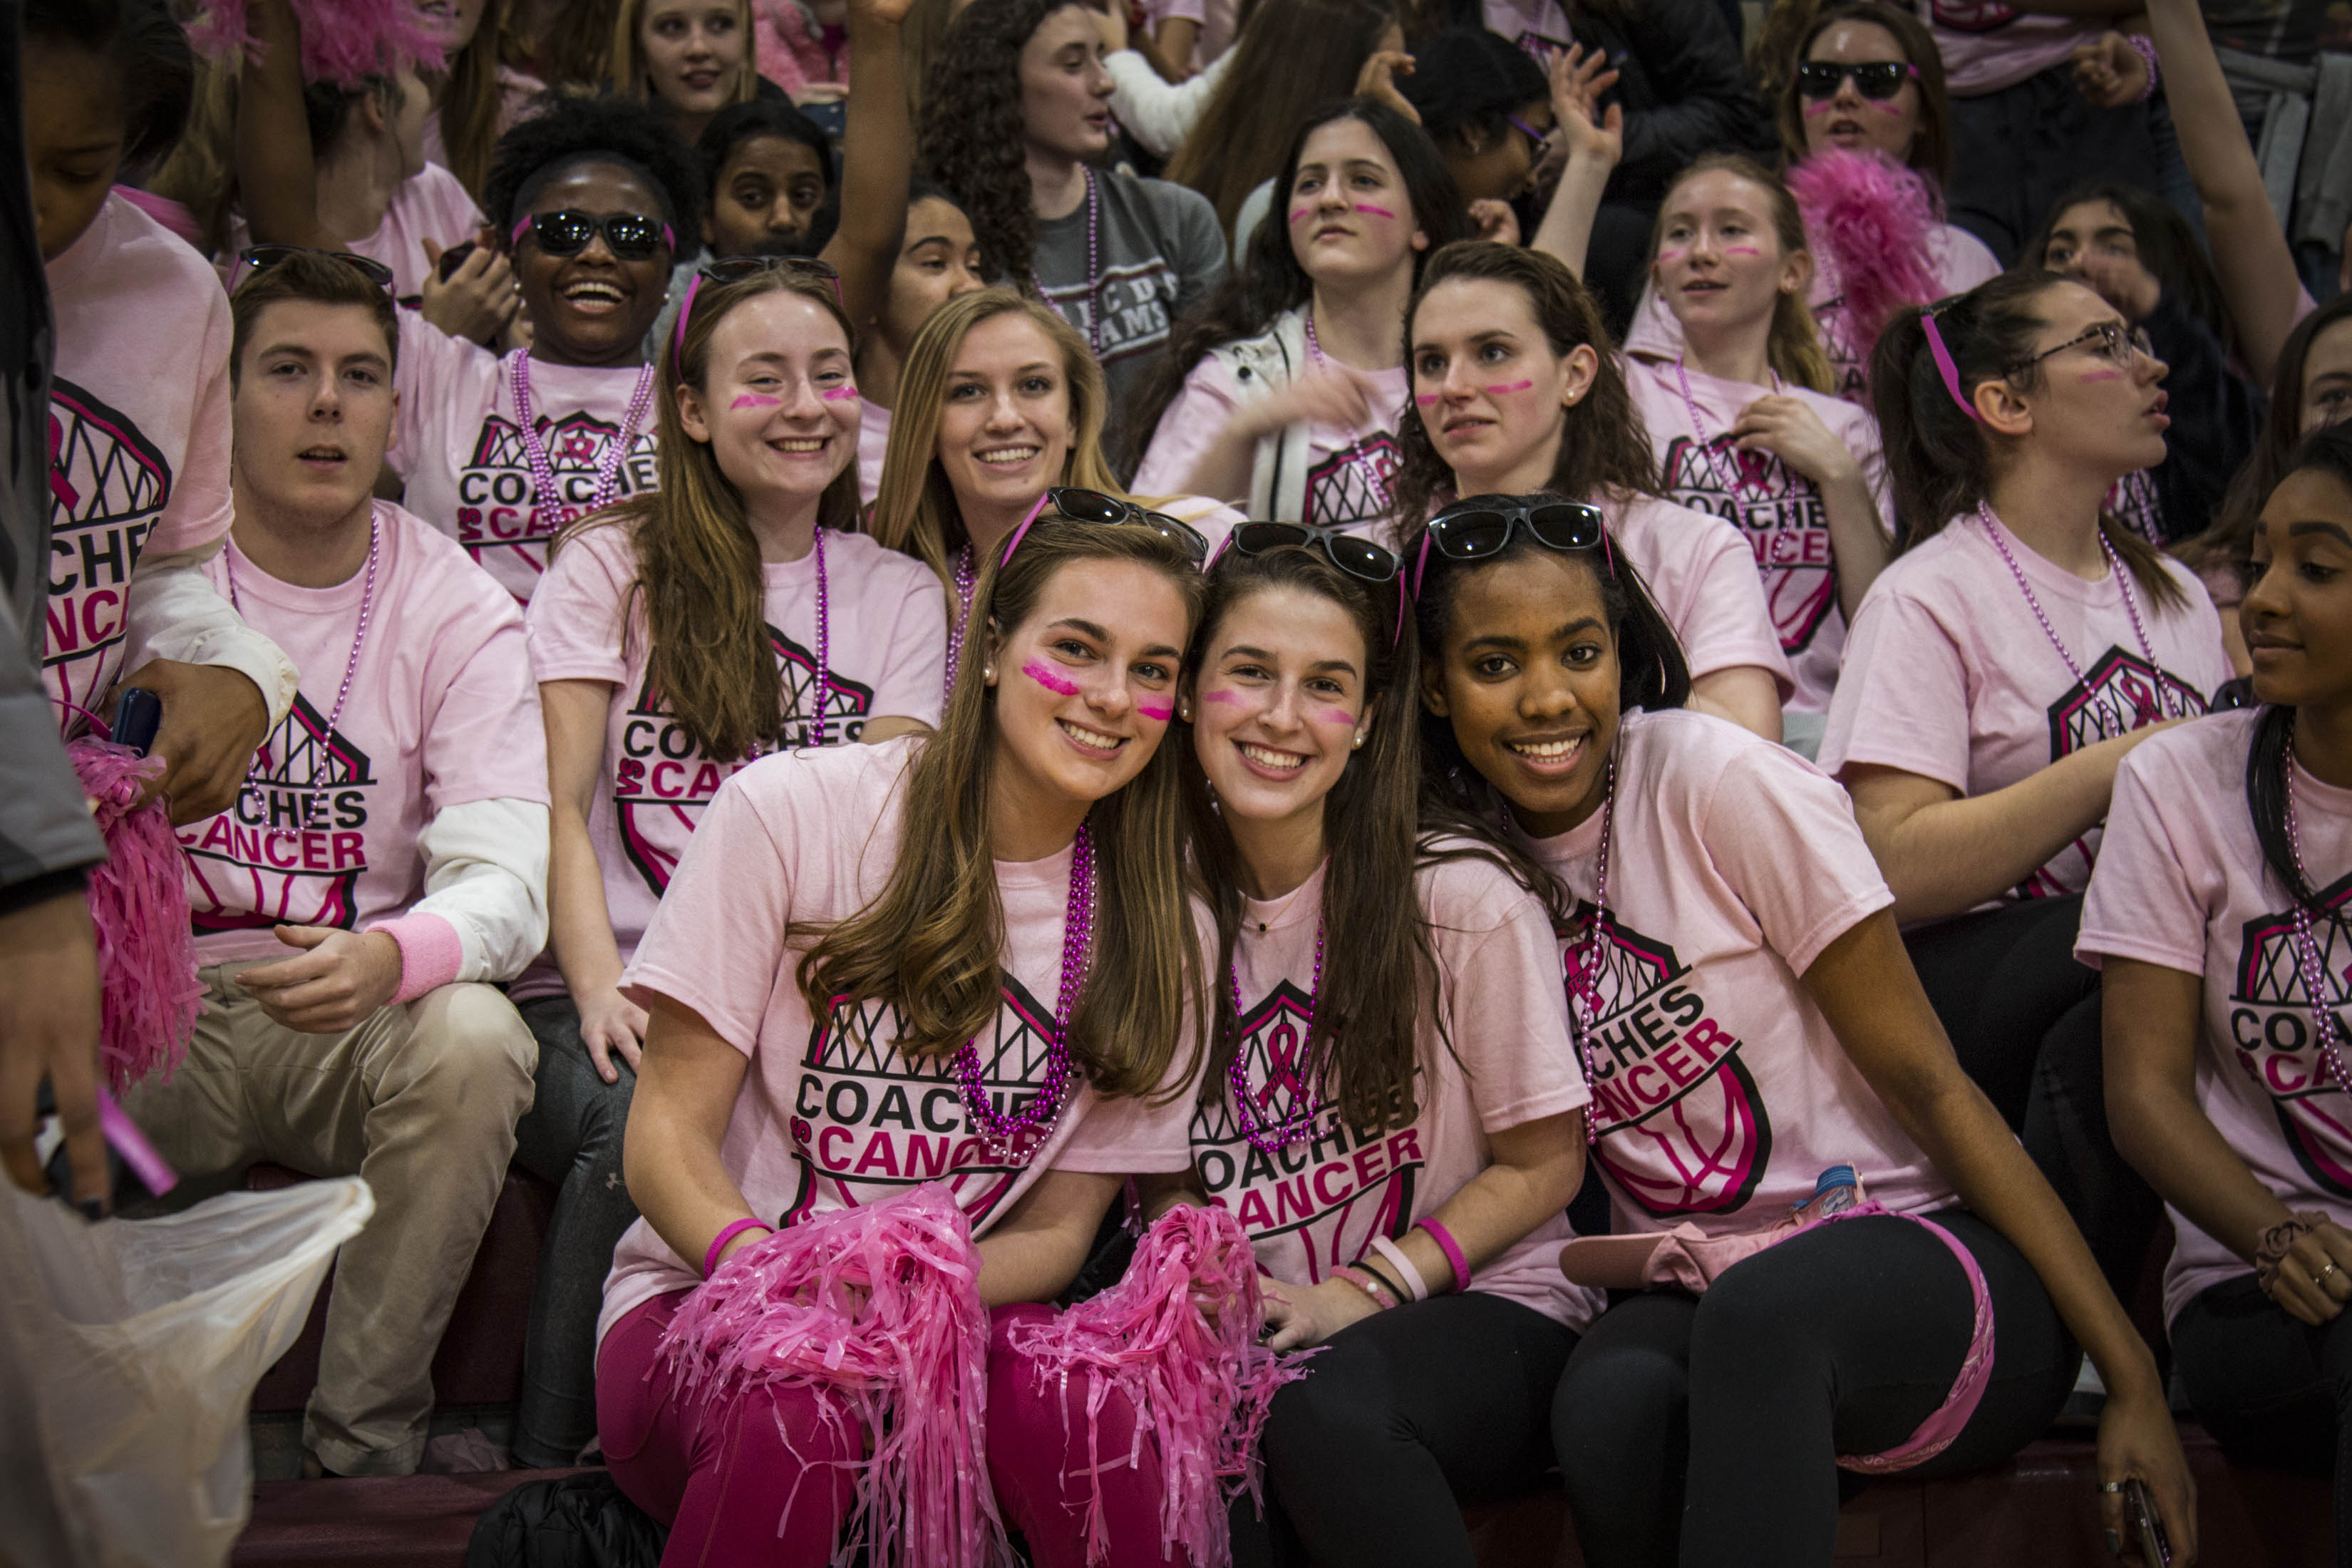 coaches vs. cancer basketball fundraiser to benefit American Cancer Society